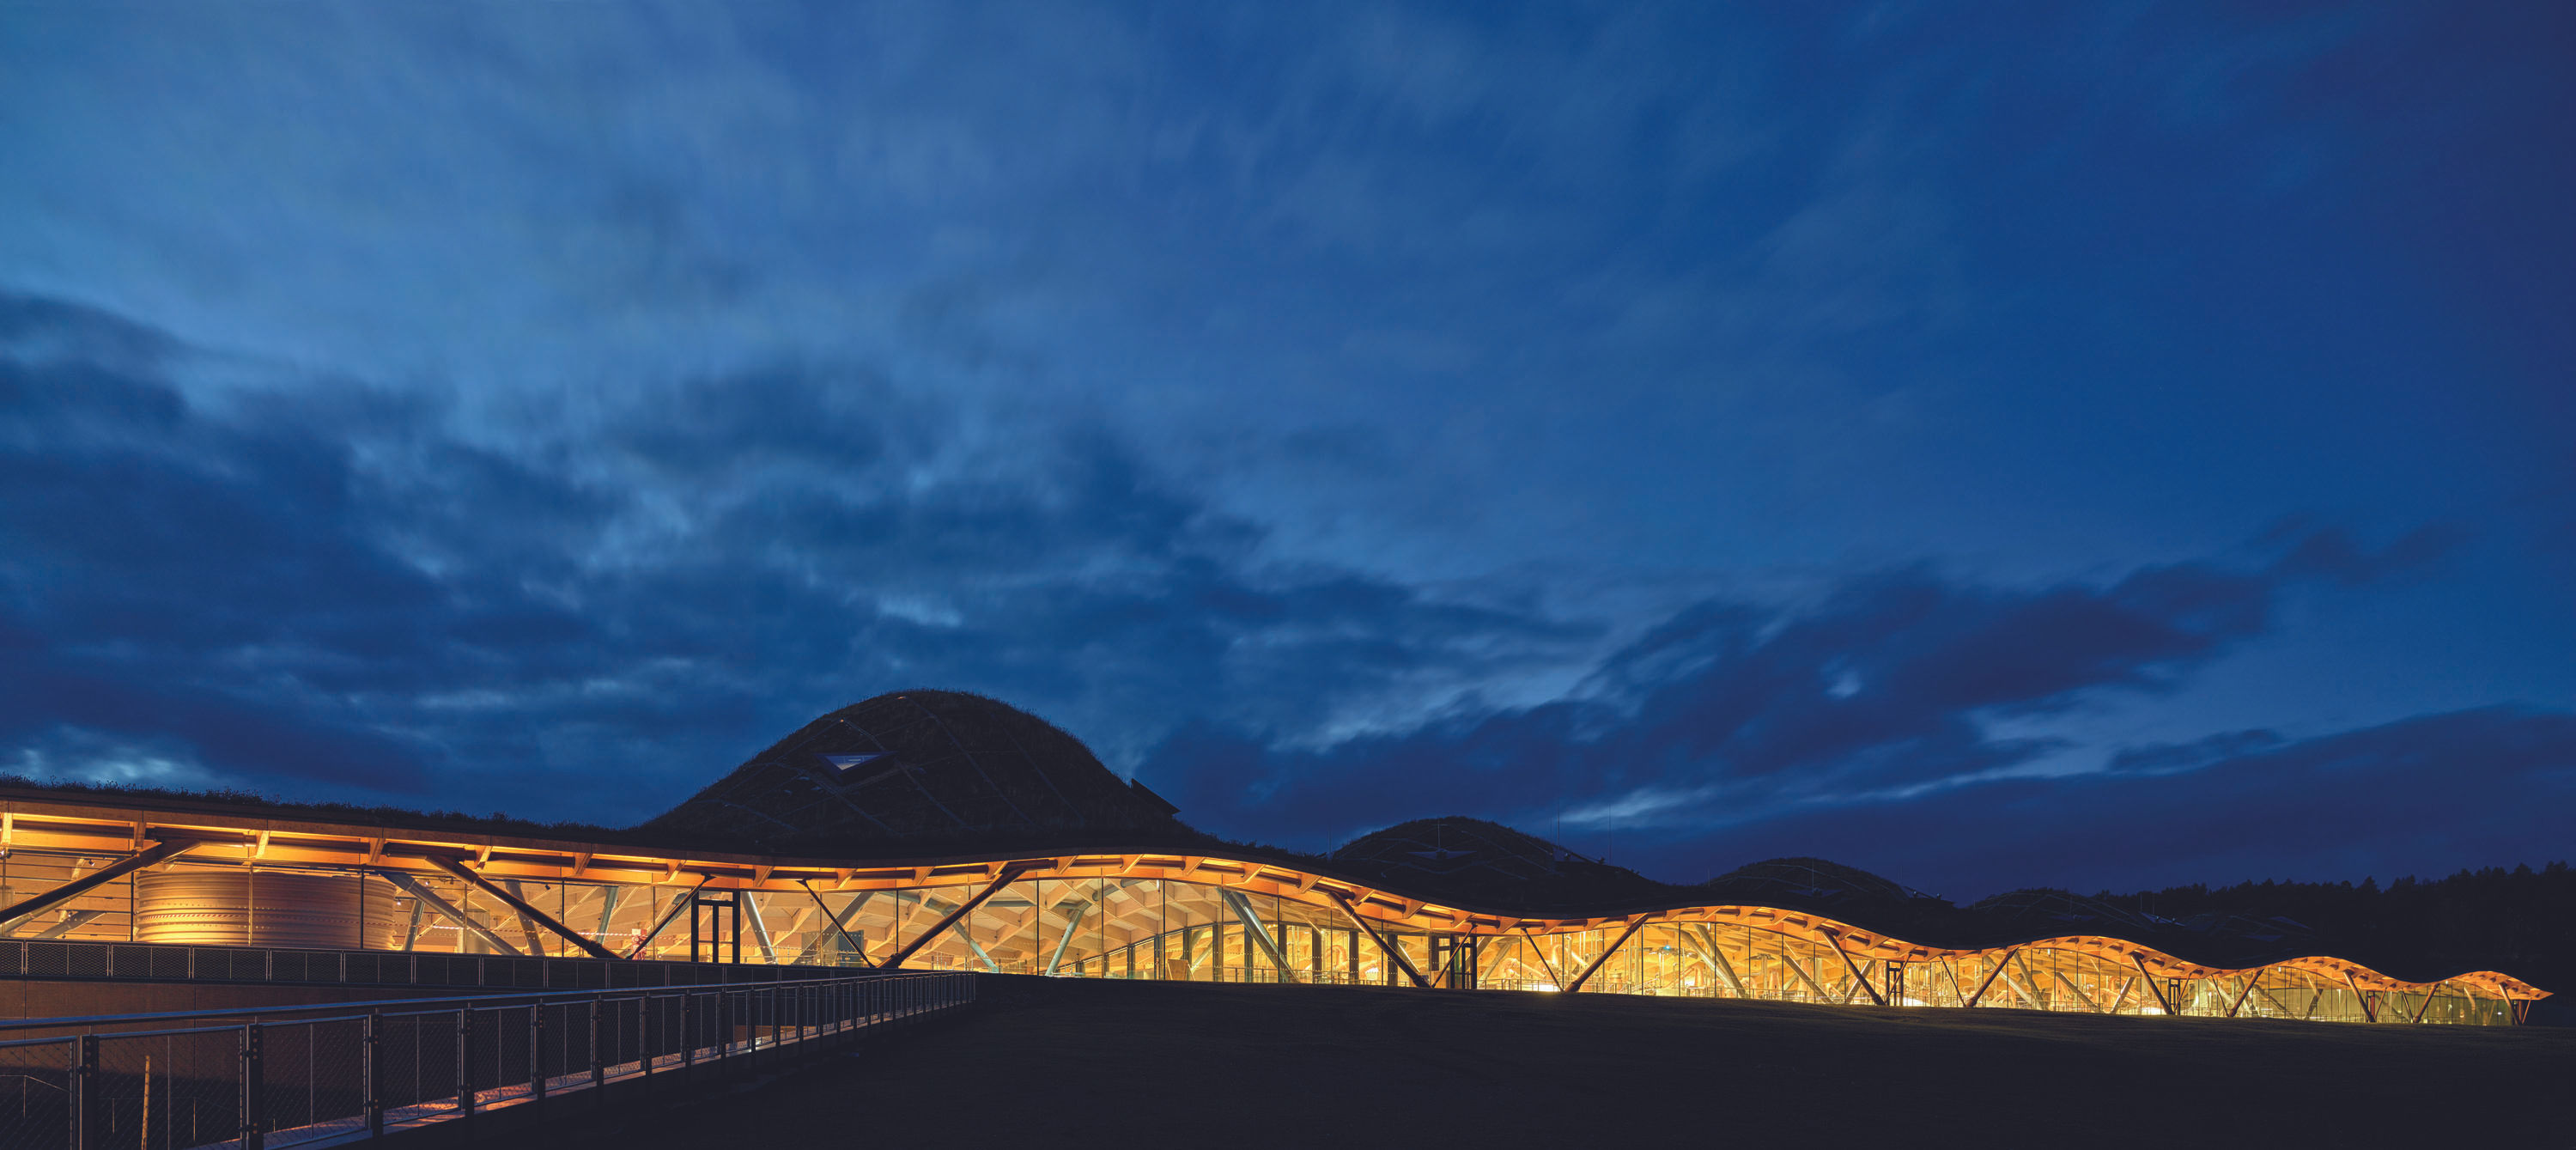 5 things you didn’t know about the new Macallan distillery in Speyside